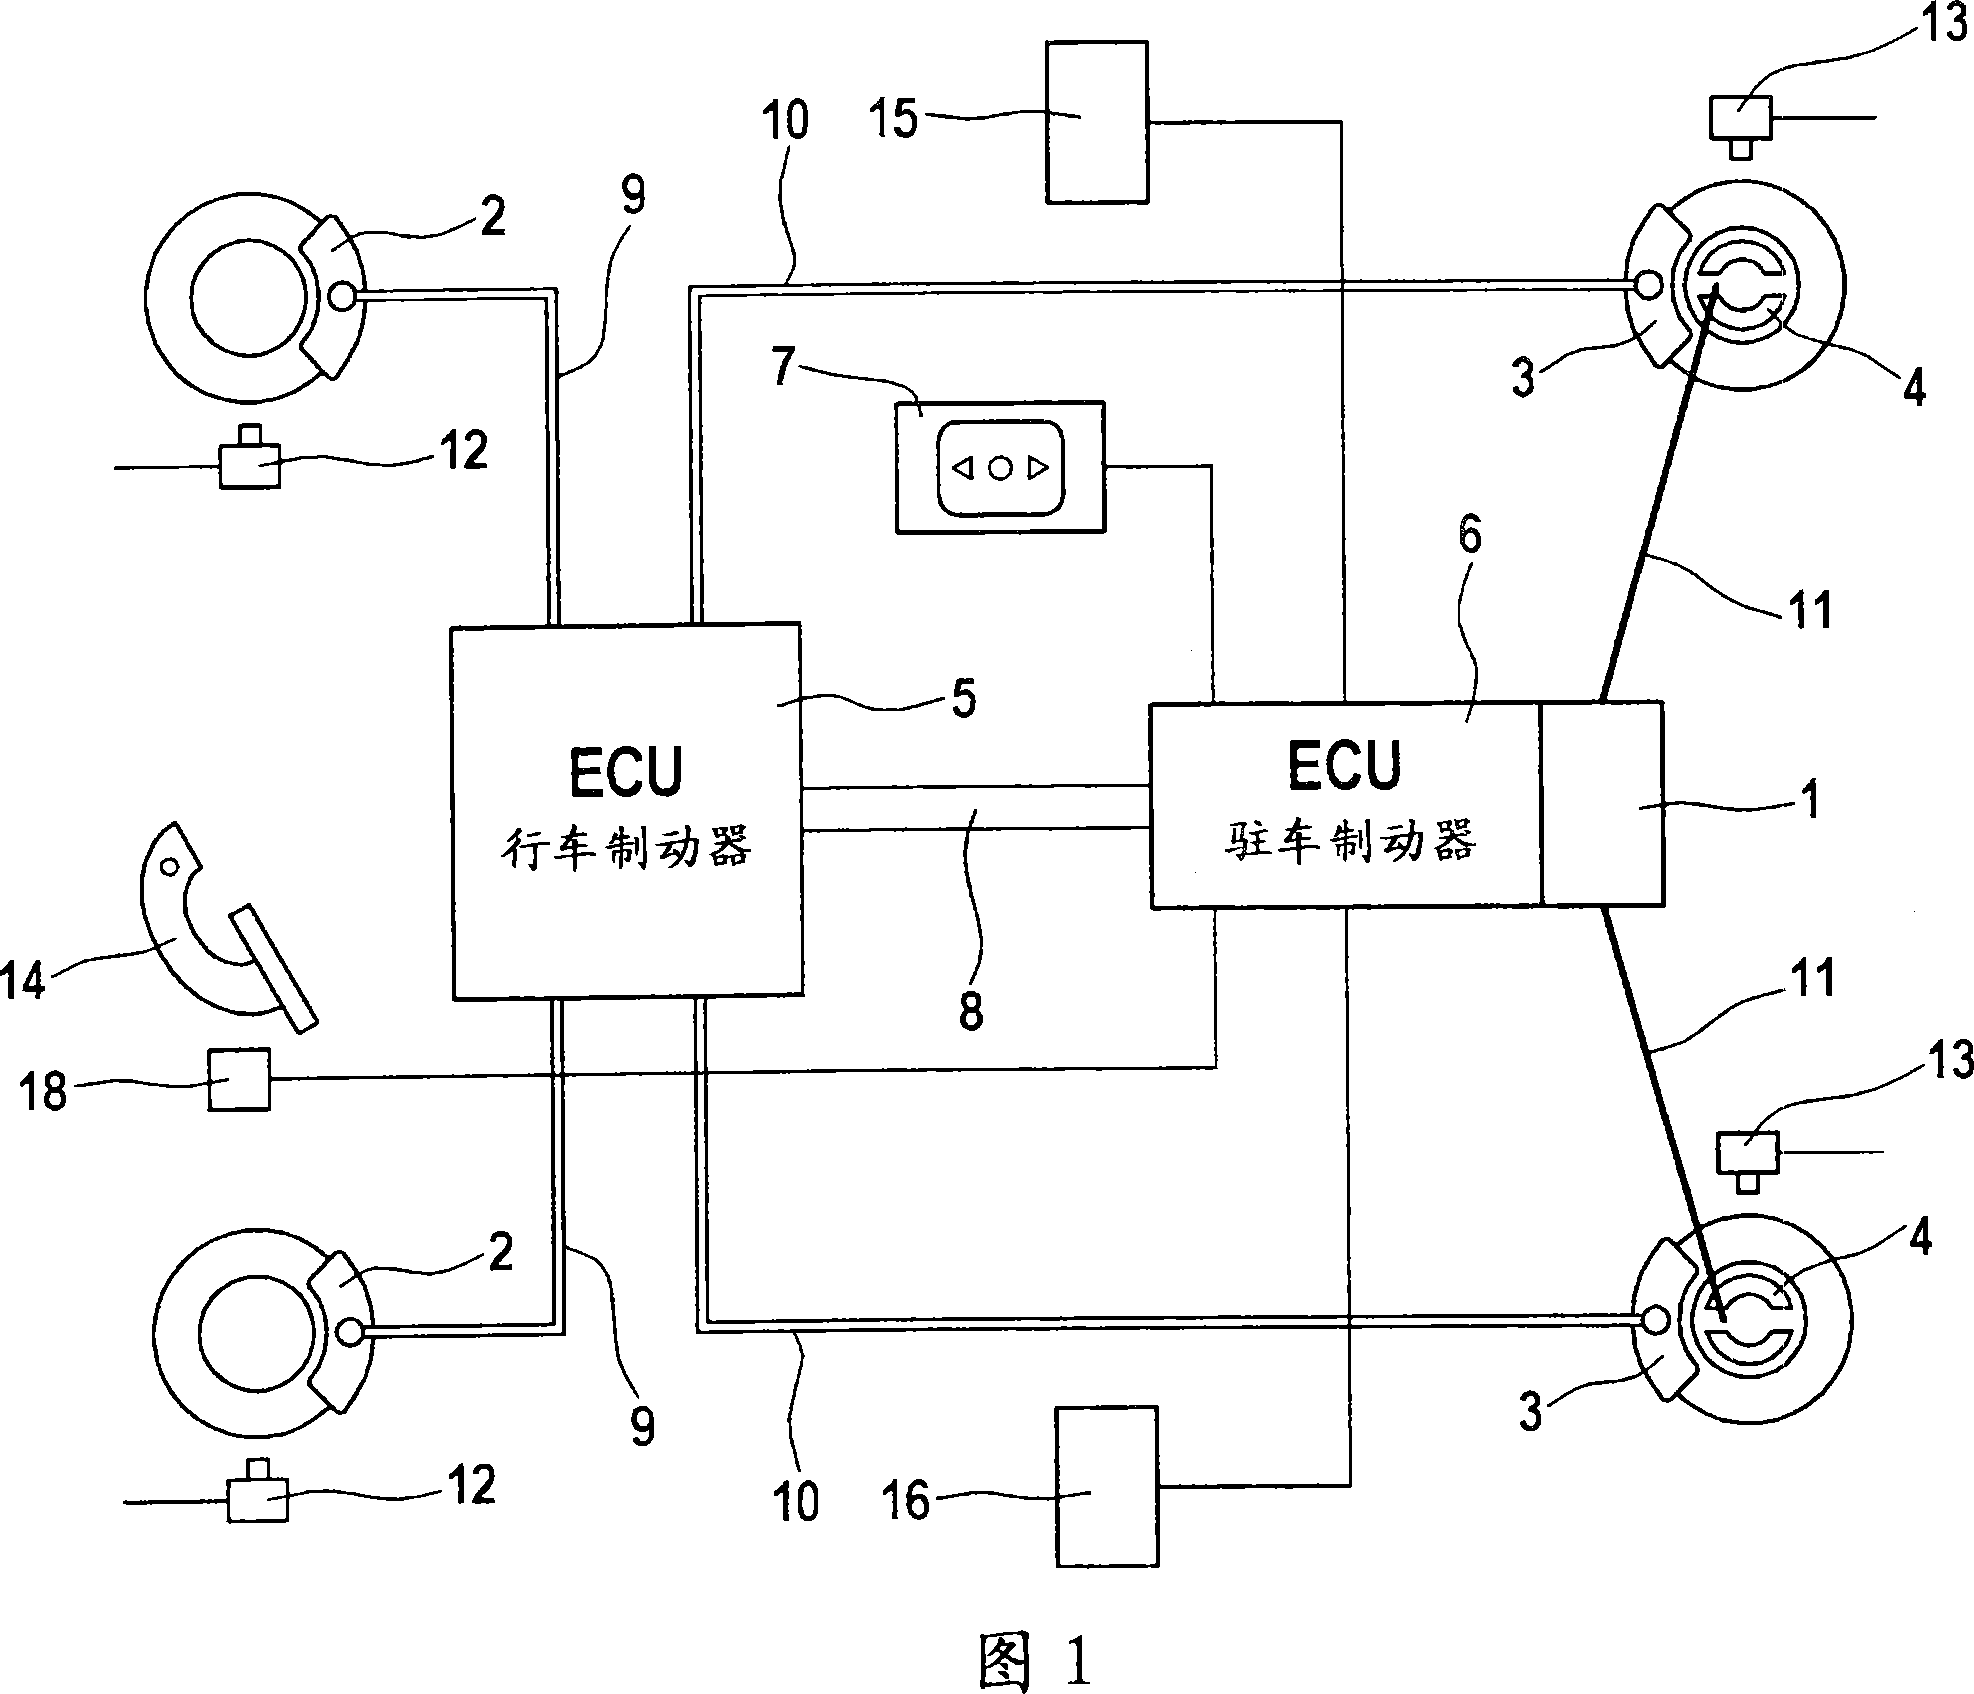 Method for operation of a braking system for a motor vehicle